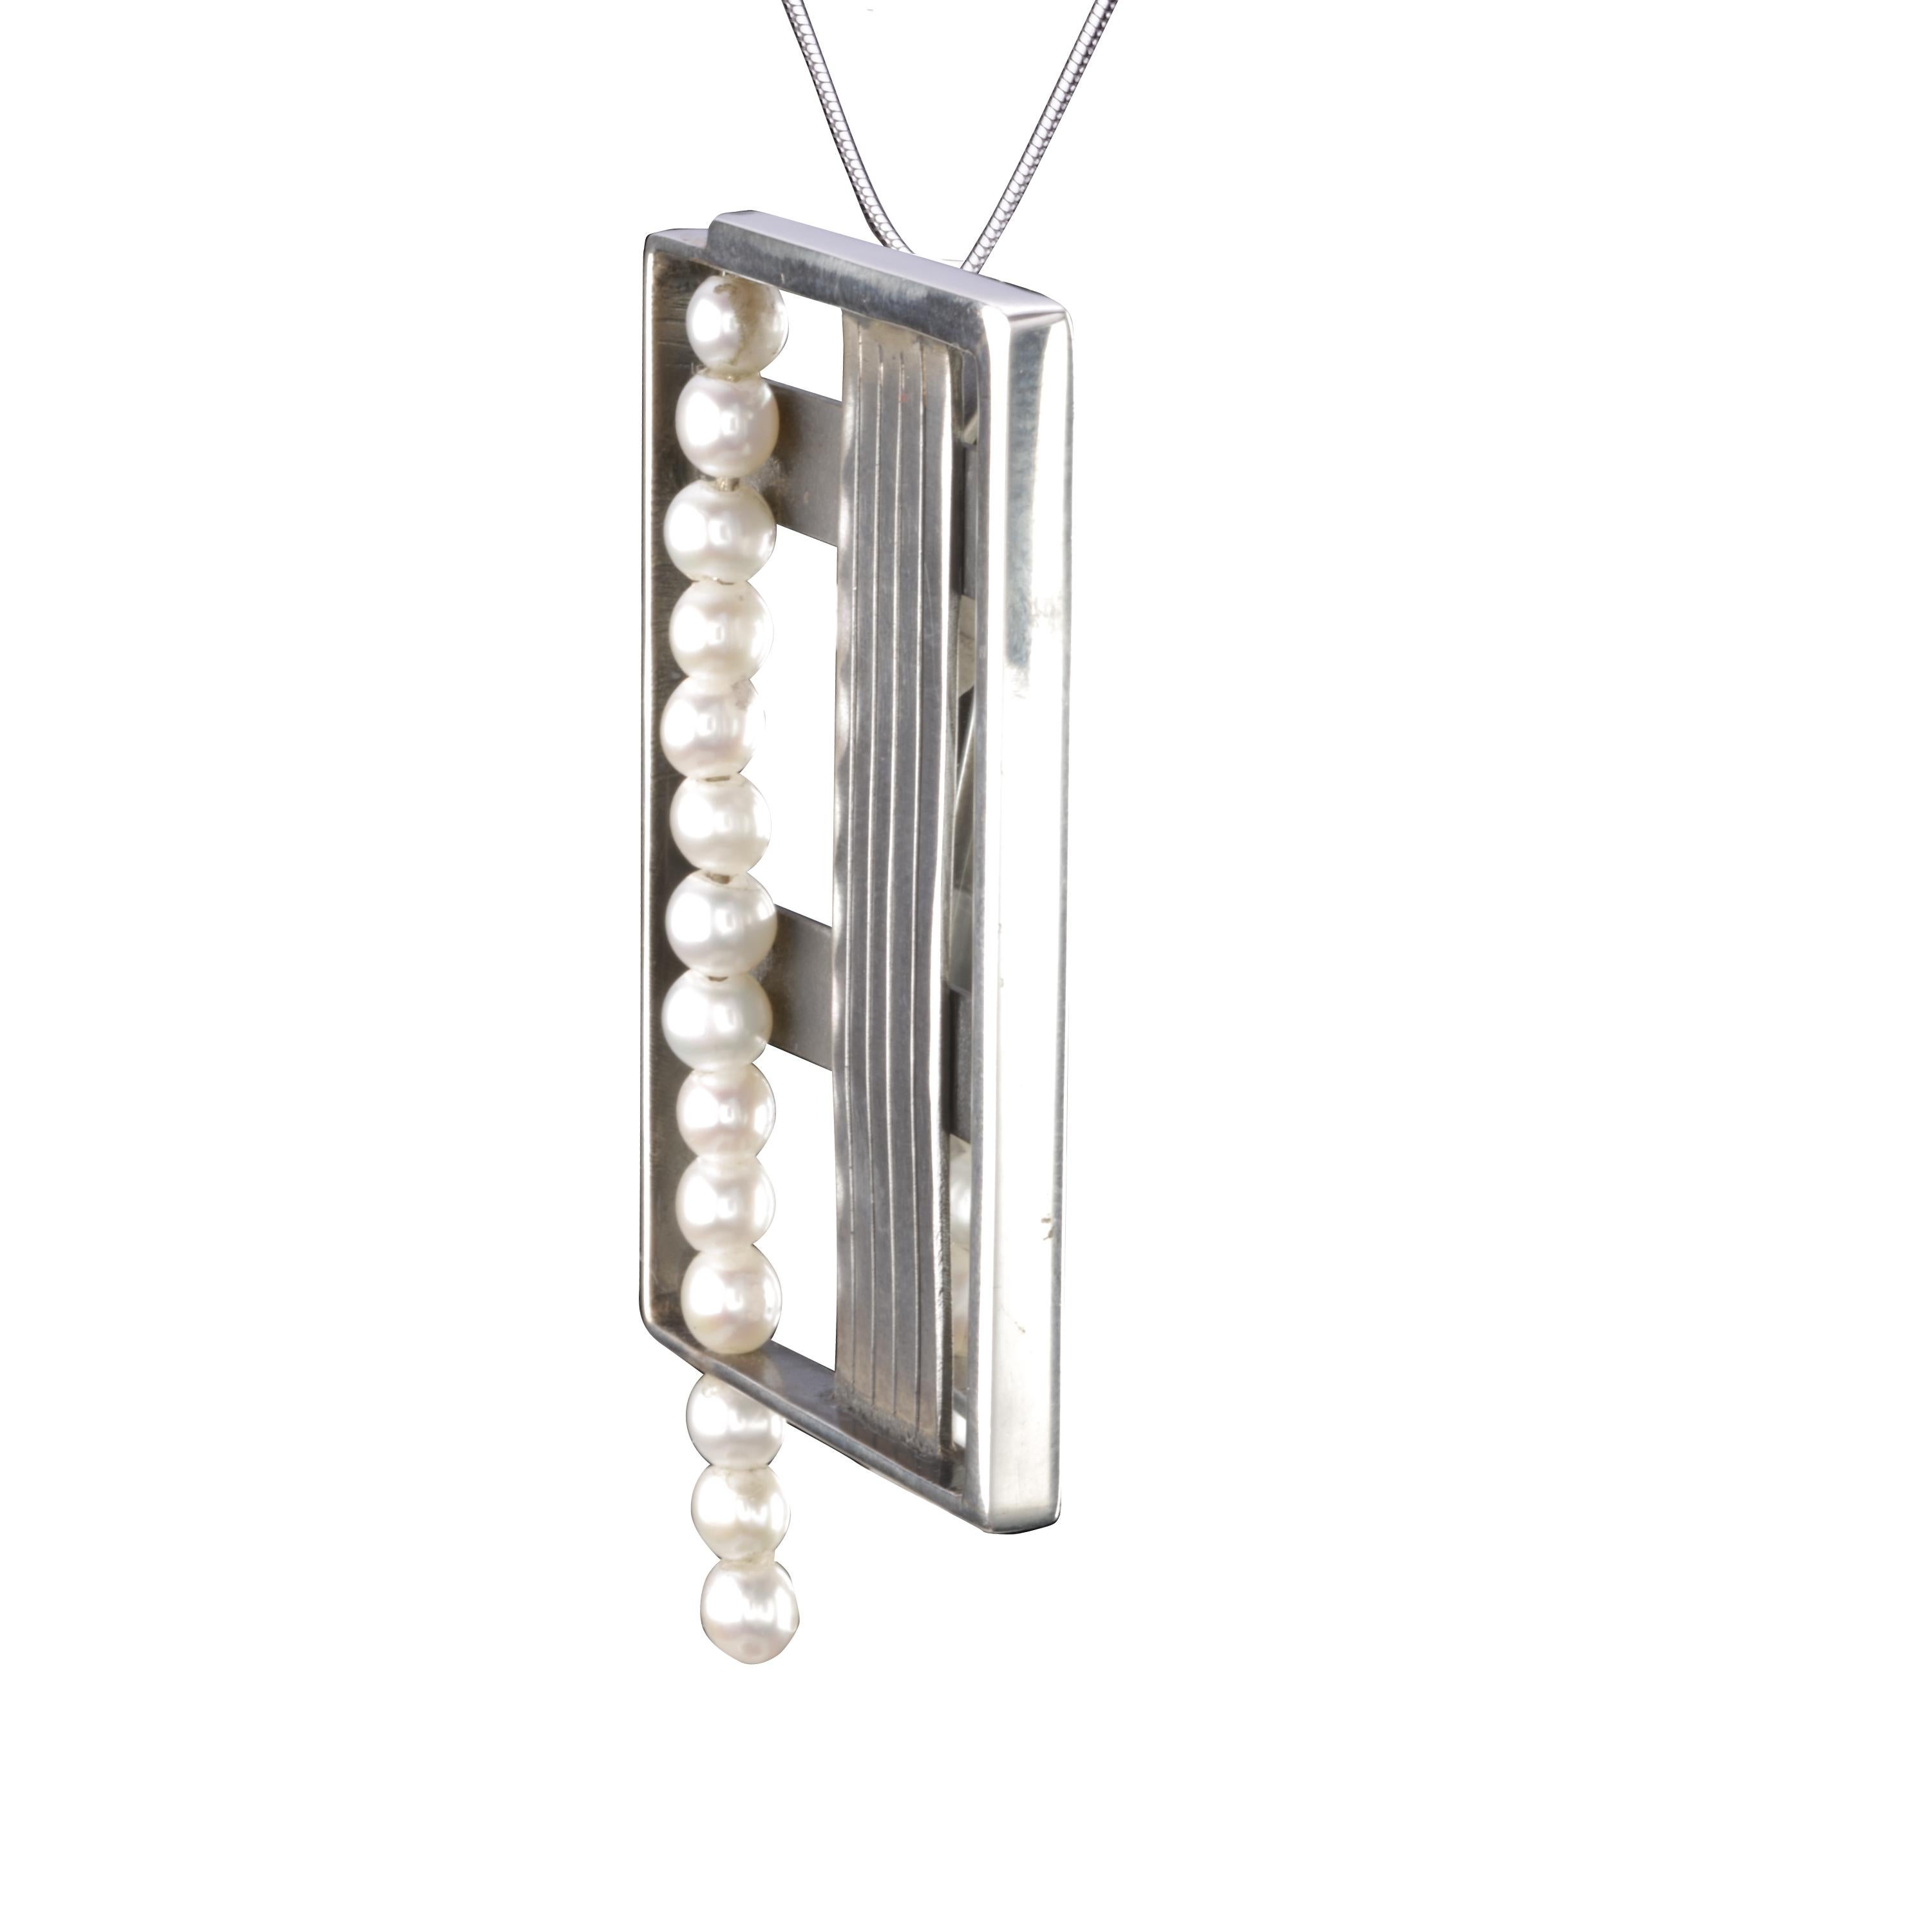 This sculptural-style pendant is handmade in Sterling Silver with freshwater pearls.
The lines on the vertical silver part are hand-engraved.
The remoivable, super-plane, minimalist long silver chain is included in the price. 
Designed and handmade